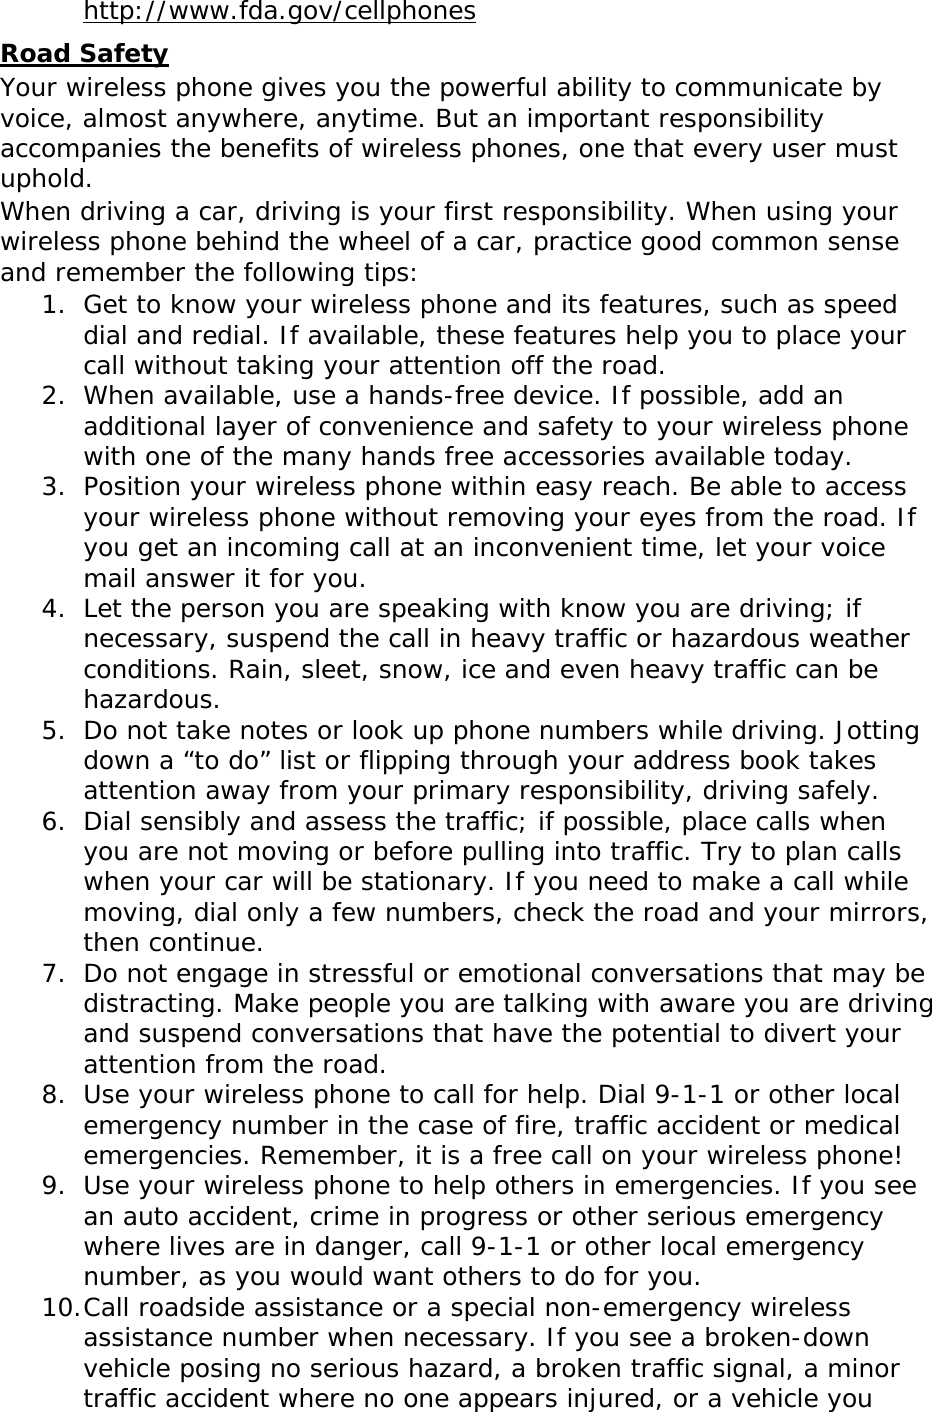  http://www.fda.gov/cellphones Road Safety Your wireless phone gives you the powerful ability to communicate by voice, almost anywhere, anytime. But an important responsibility accompanies the benefits of wireless phones, one that every user must uphold. When driving a car, driving is your first responsibility. When using your wireless phone behind the wheel of a car, practice good common sense and remember the following tips: 1. Get to know your wireless phone and its features, such as speed dial and redial. If available, these features help you to place your call without taking your attention off the road. 2. When available, use a hands-free device. If possible, add an additional layer of convenience and safety to your wireless phone with one of the many hands free accessories available today. 3. Position your wireless phone within easy reach. Be able to access your wireless phone without removing your eyes from the road. If you get an incoming call at an inconvenient time, let your voice mail answer it for you. 4. Let the person you are speaking with know you are driving; if necessary, suspend the call in heavy traffic or hazardous weather conditions. Rain, sleet, snow, ice and even heavy traffic can be hazardous. 5. Do not take notes or look up phone numbers while driving. Jotting down a “to do” list or flipping through your address book takes attention away from your primary responsibility, driving safely. 6. Dial sensibly and assess the traffic; if possible, place calls when you are not moving or before pulling into traffic. Try to plan calls when your car will be stationary. If you need to make a call while moving, dial only a few numbers, check the road and your mirrors, then continue. 7. Do not engage in stressful or emotional conversations that may be distracting. Make people you are talking with aware you are driving and suspend conversations that have the potential to divert your attention from the road. 8. Use your wireless phone to call for help. Dial 9-1-1 or other local emergency number in the case of fire, traffic accident or medical emergencies. Remember, it is a free call on your wireless phone! 9. Use your wireless phone to help others in emergencies. If you see an auto accident, crime in progress or other serious emergency where lives are in danger, call 9-1-1 or other local emergency number, as you would want others to do for you. 10. Call roadside assistance or a special non-emergency wireless assistance number when necessary. If you see a broken-down vehicle posing no serious hazard, a broken traffic signal, a minor traffic accident where no one appears injured, or a vehicle you 